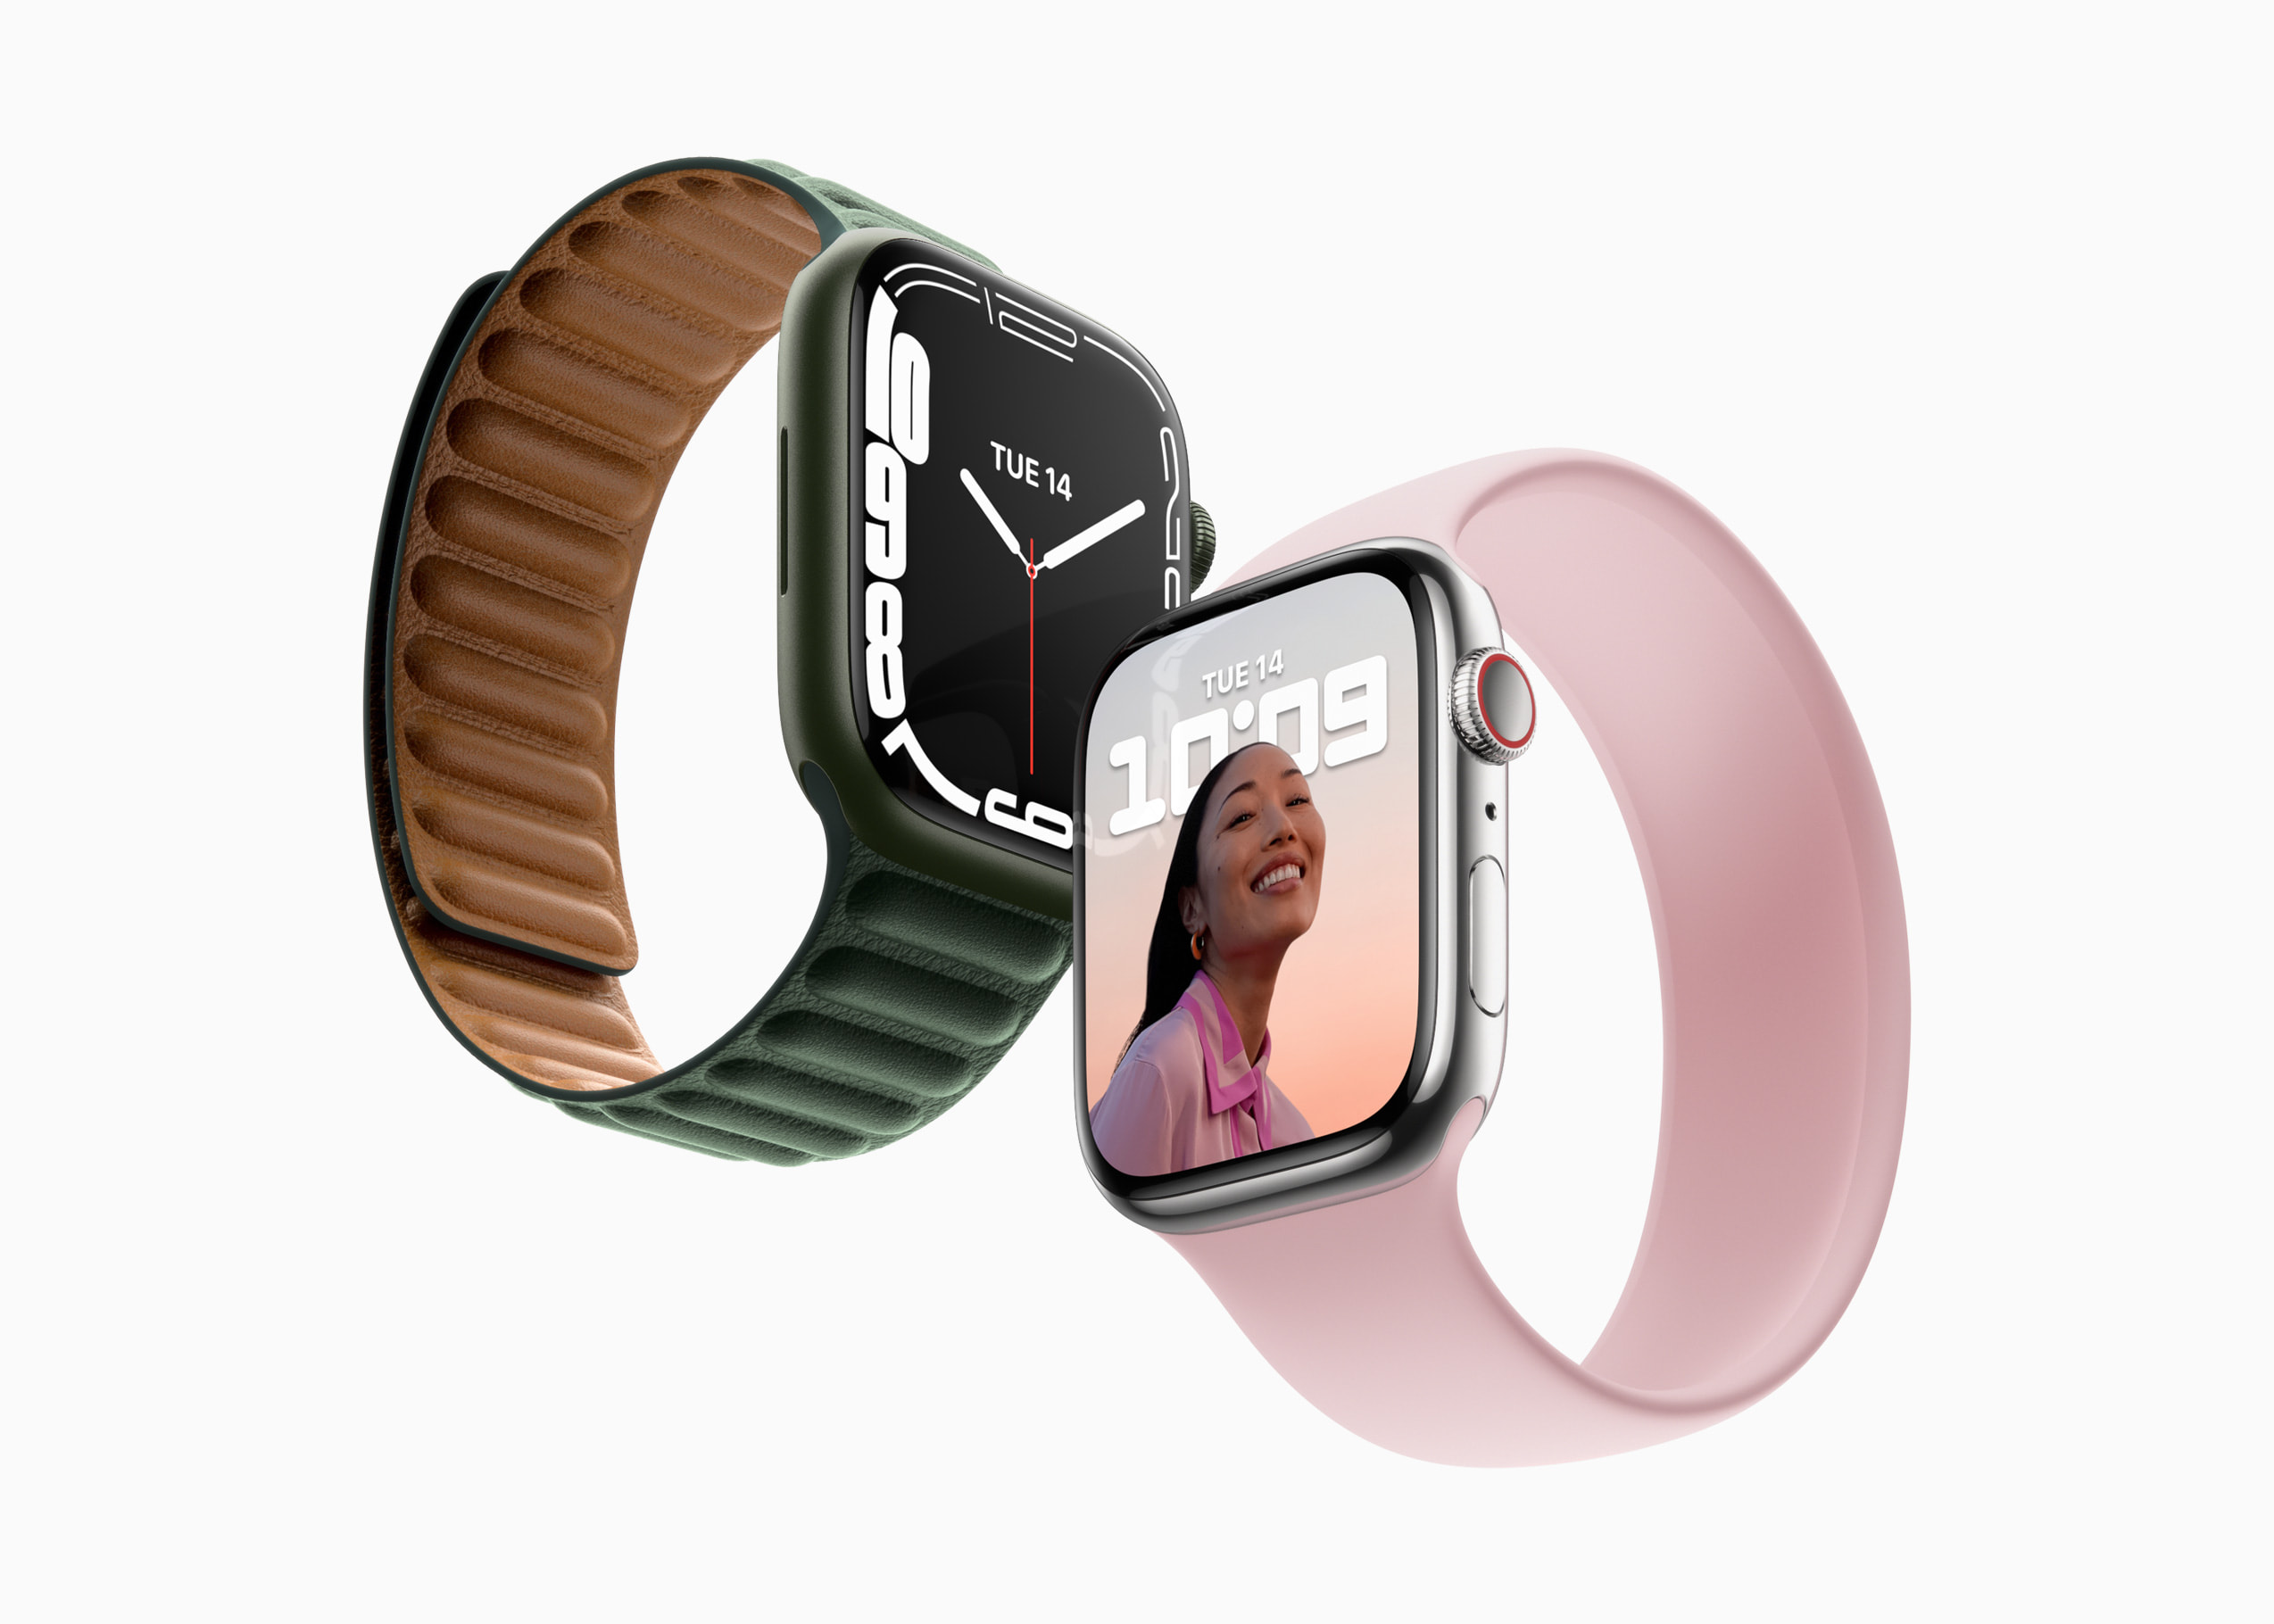 Apple Watch SE vs Apple Watch Series 7: Which should you buy?